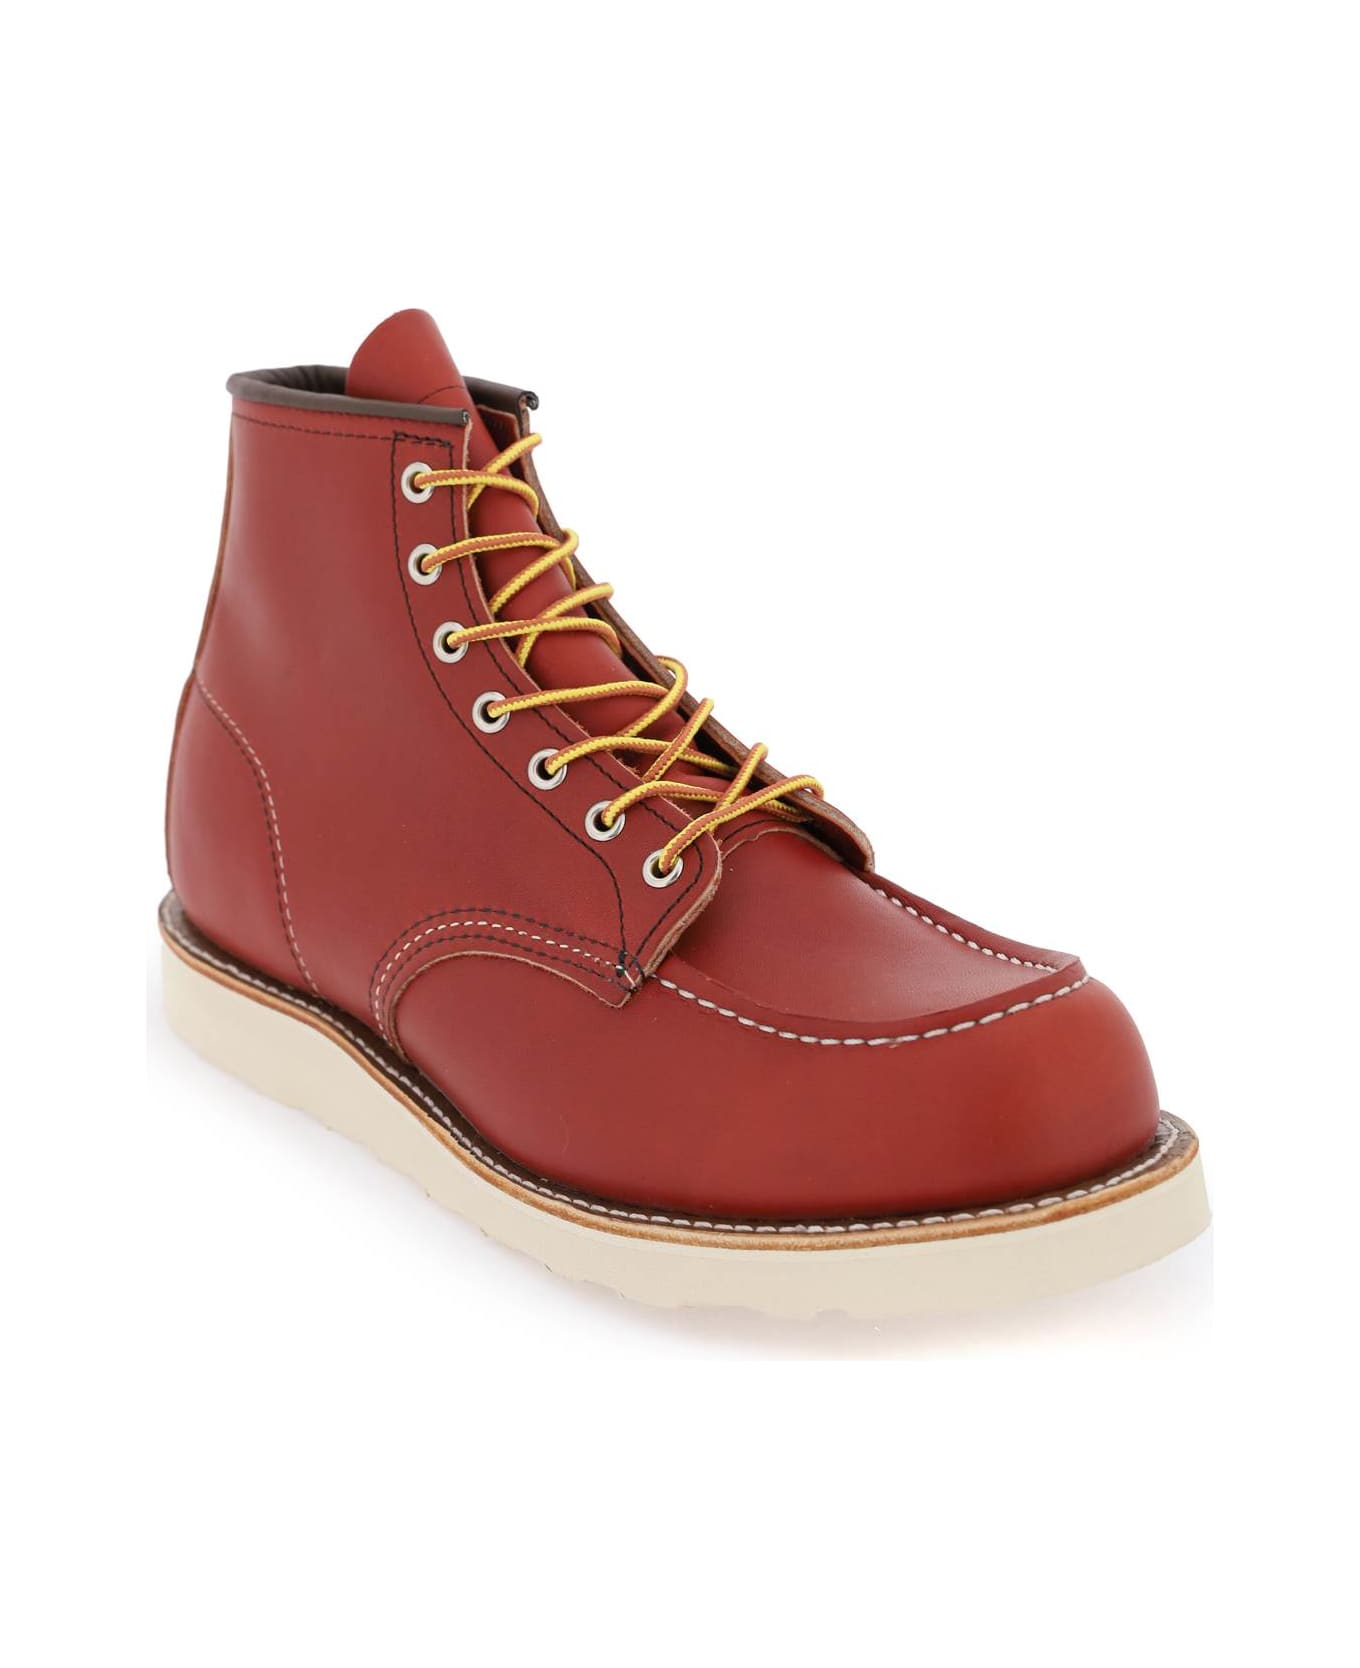 Red Wing Classic Moc Ankle Boots - ORO RUSSET (Red) ブーツ